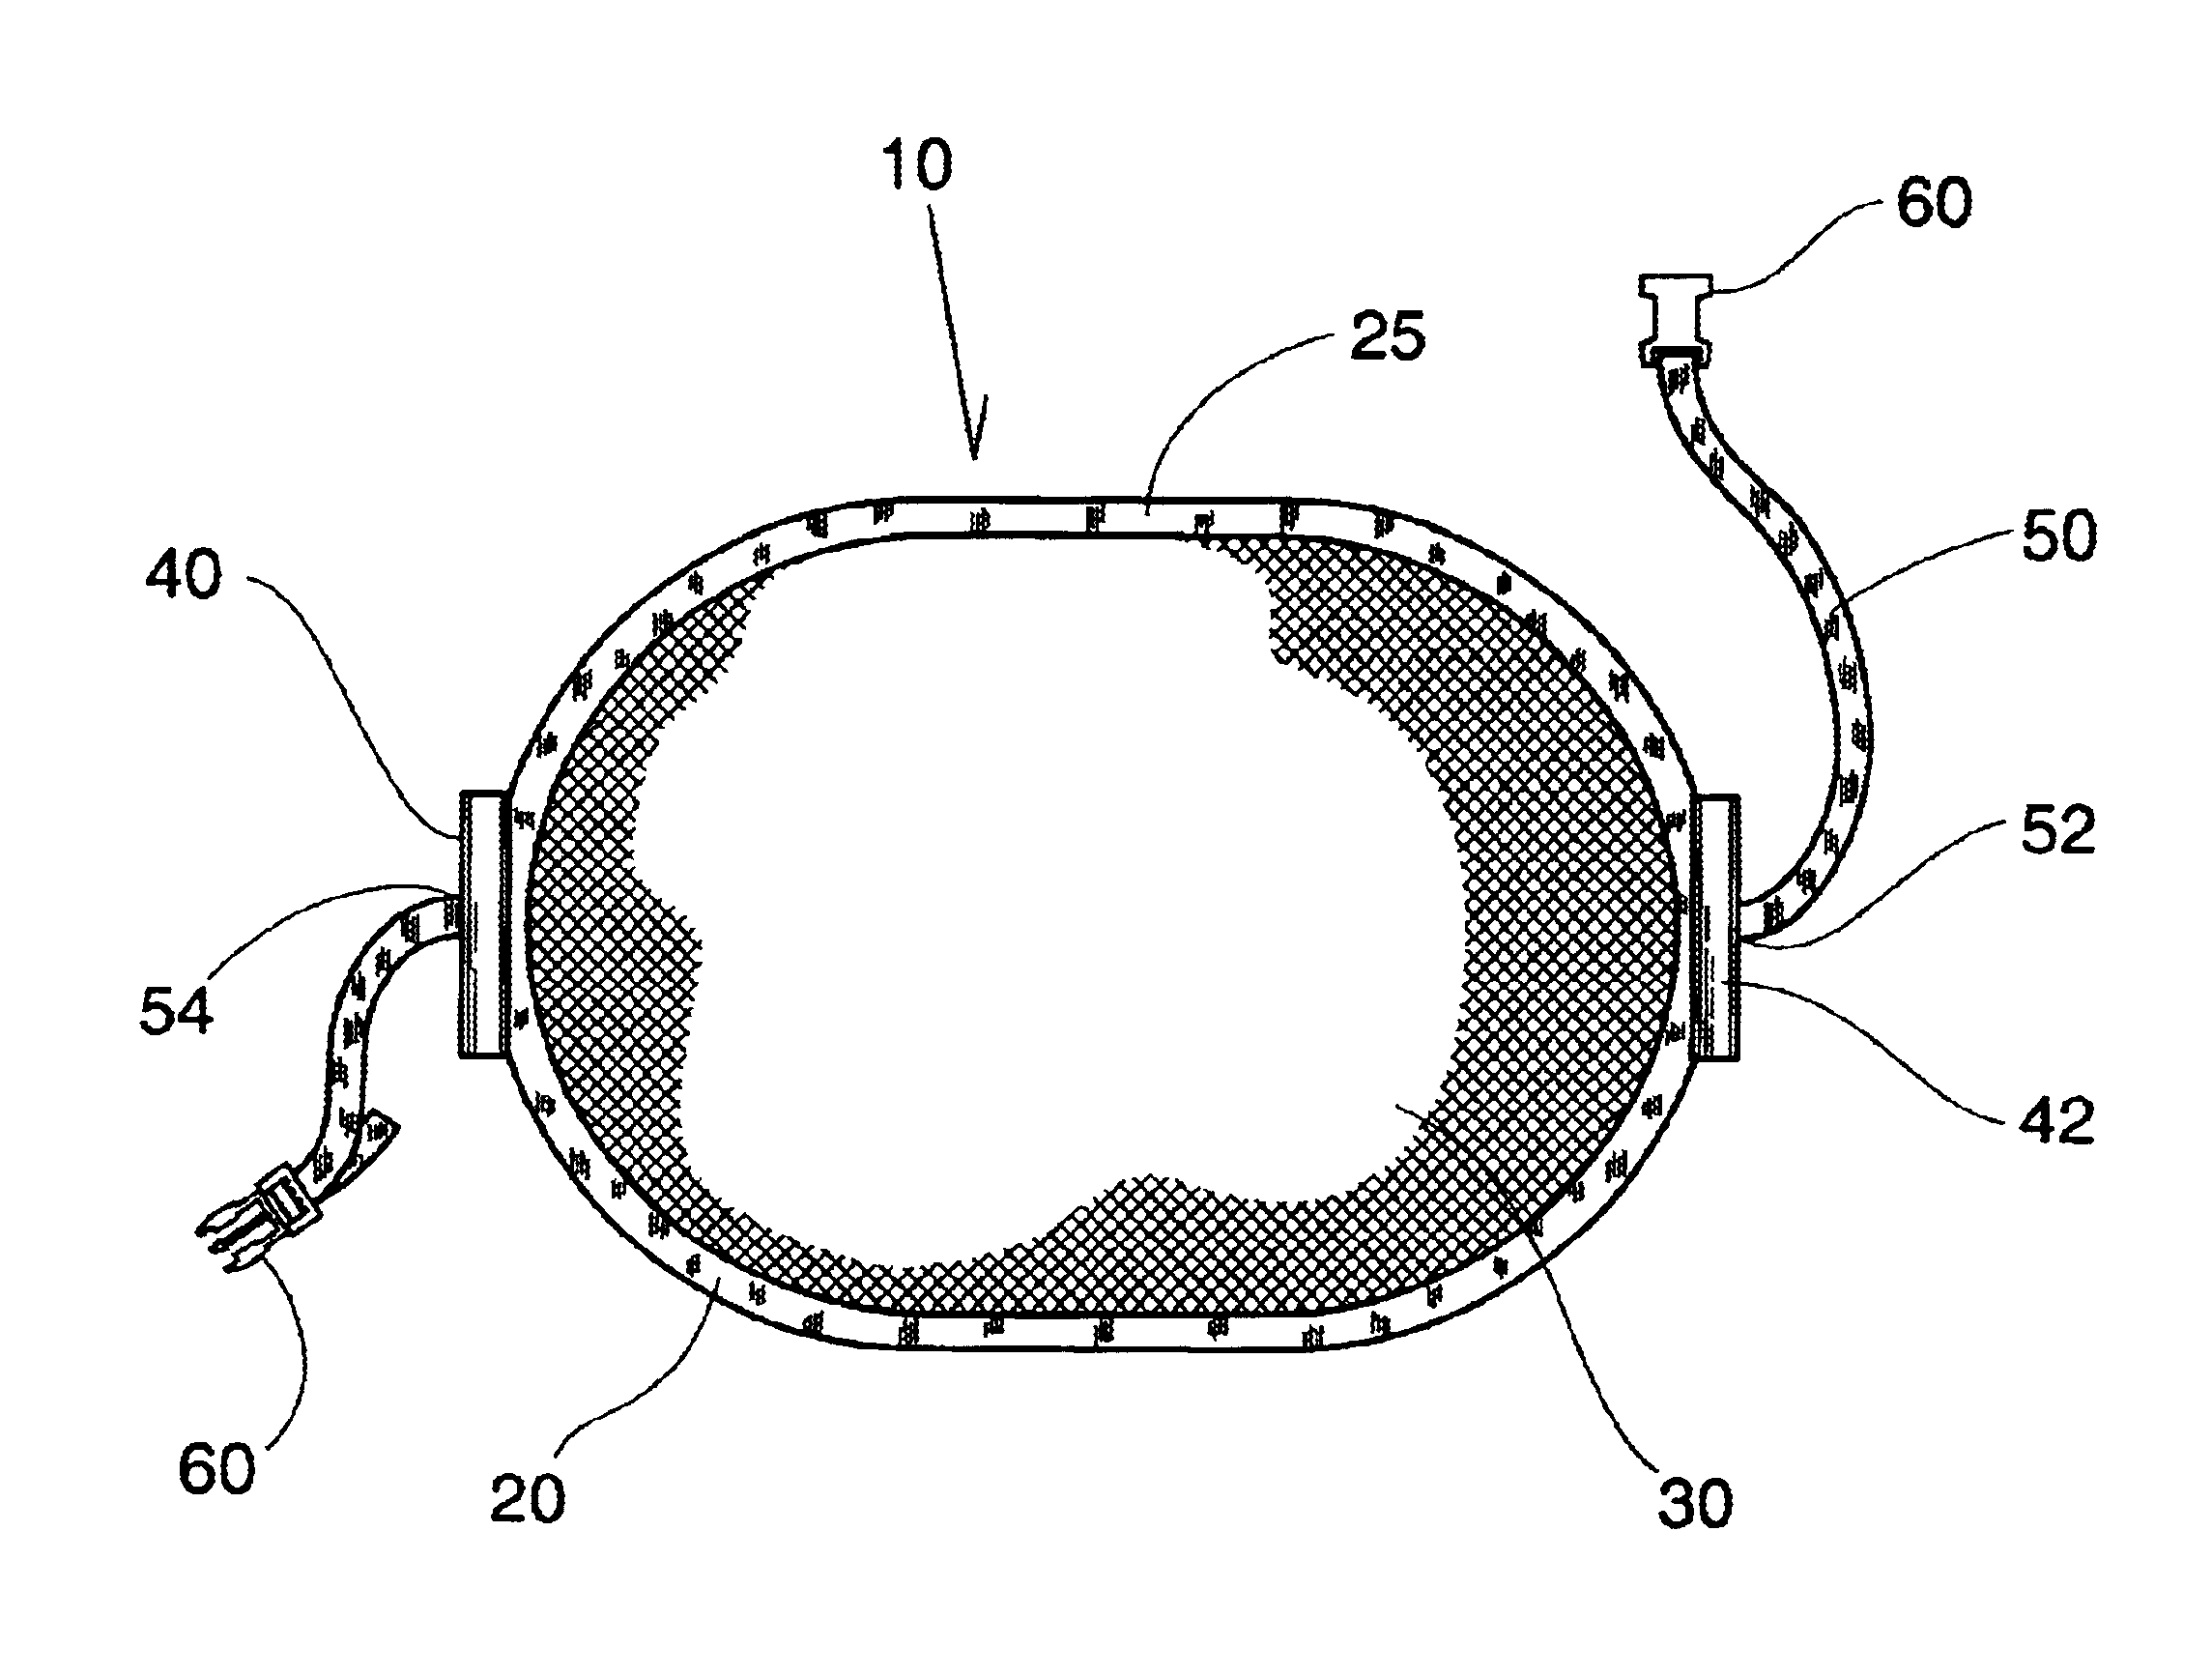 Collapsible drying apparatus and method for forming and collapsing said apparatus